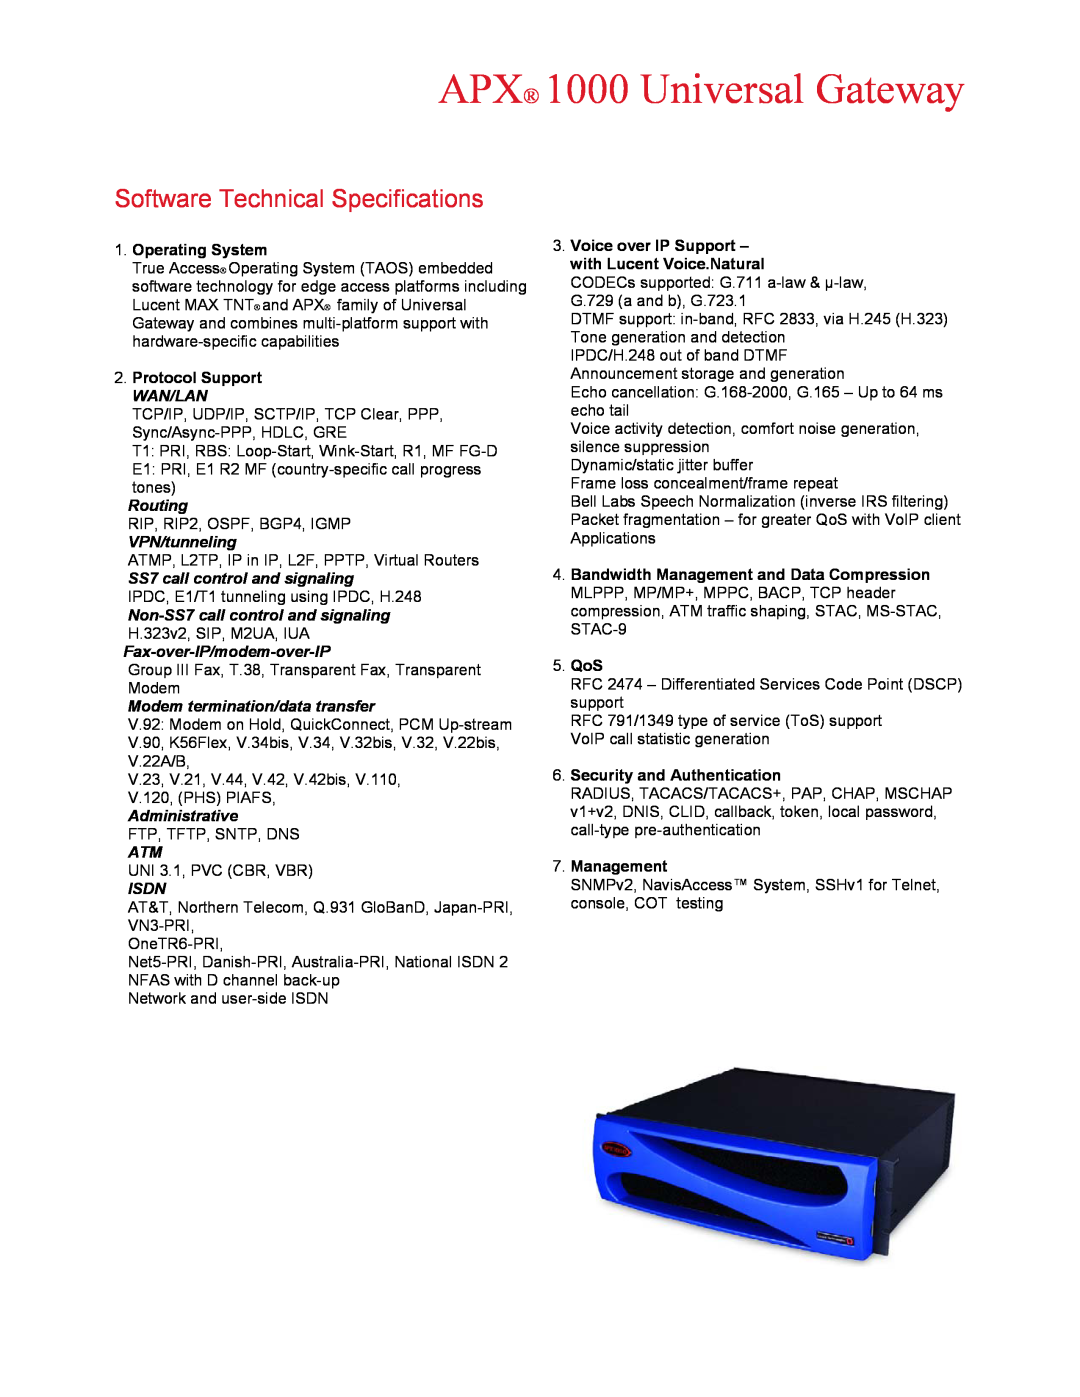 Lucent Technologies Software Technical Specifications, APX 1000 Universal Gateway, Operating System, Protocol Support 